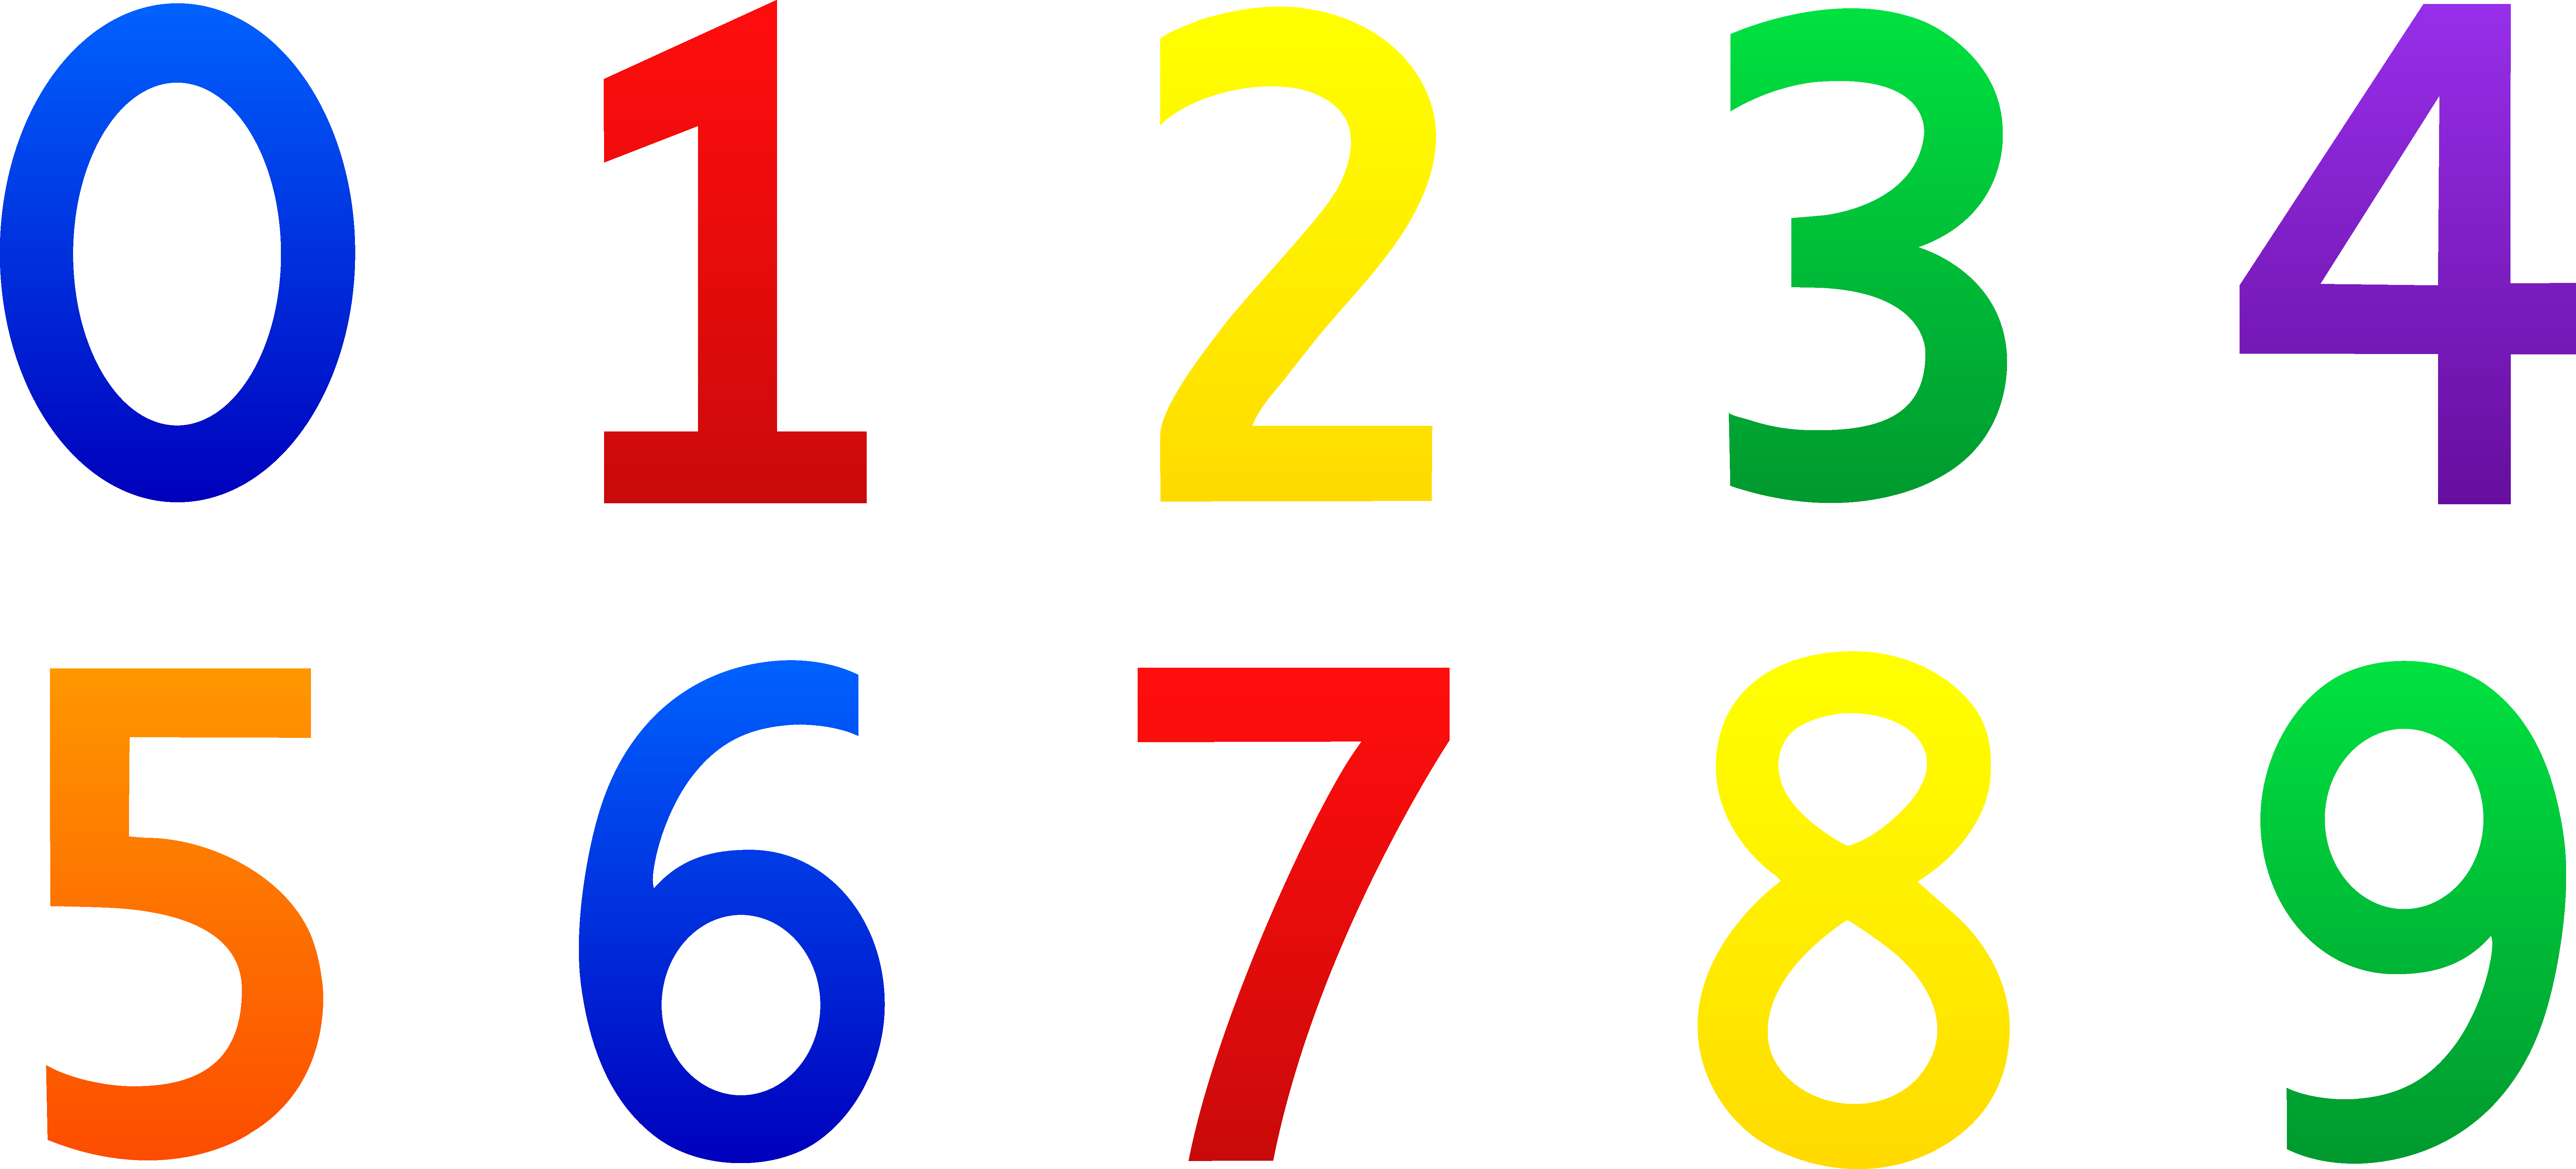 free-picture-of-numbers-download-free-picture-of-numbers-png-images